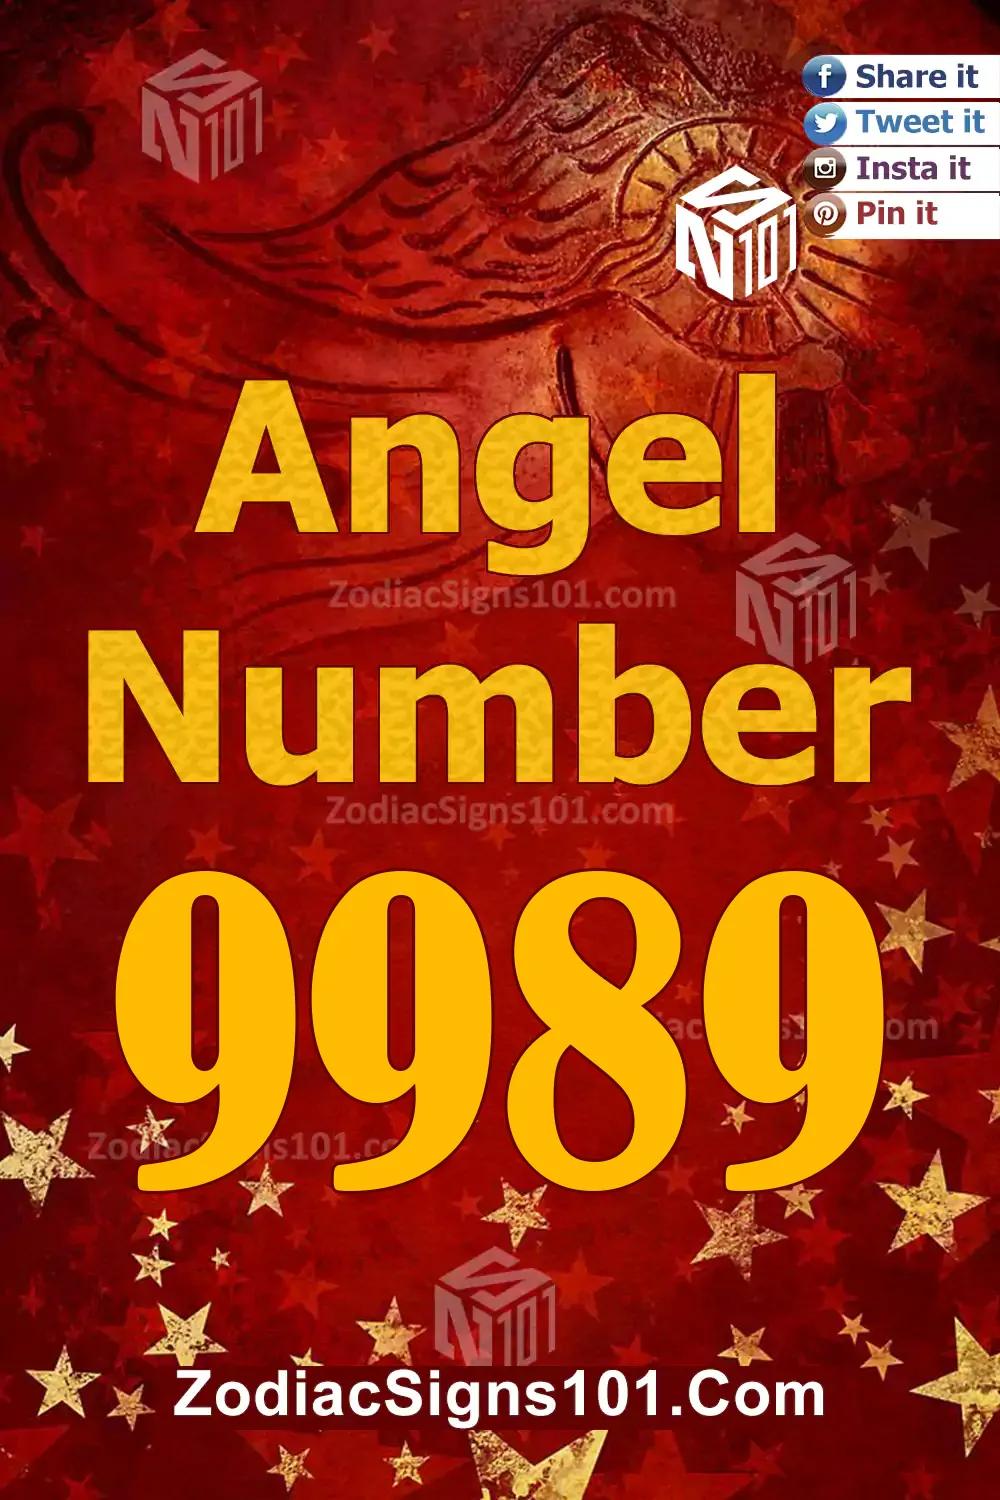 9989 Angel Number Meaning